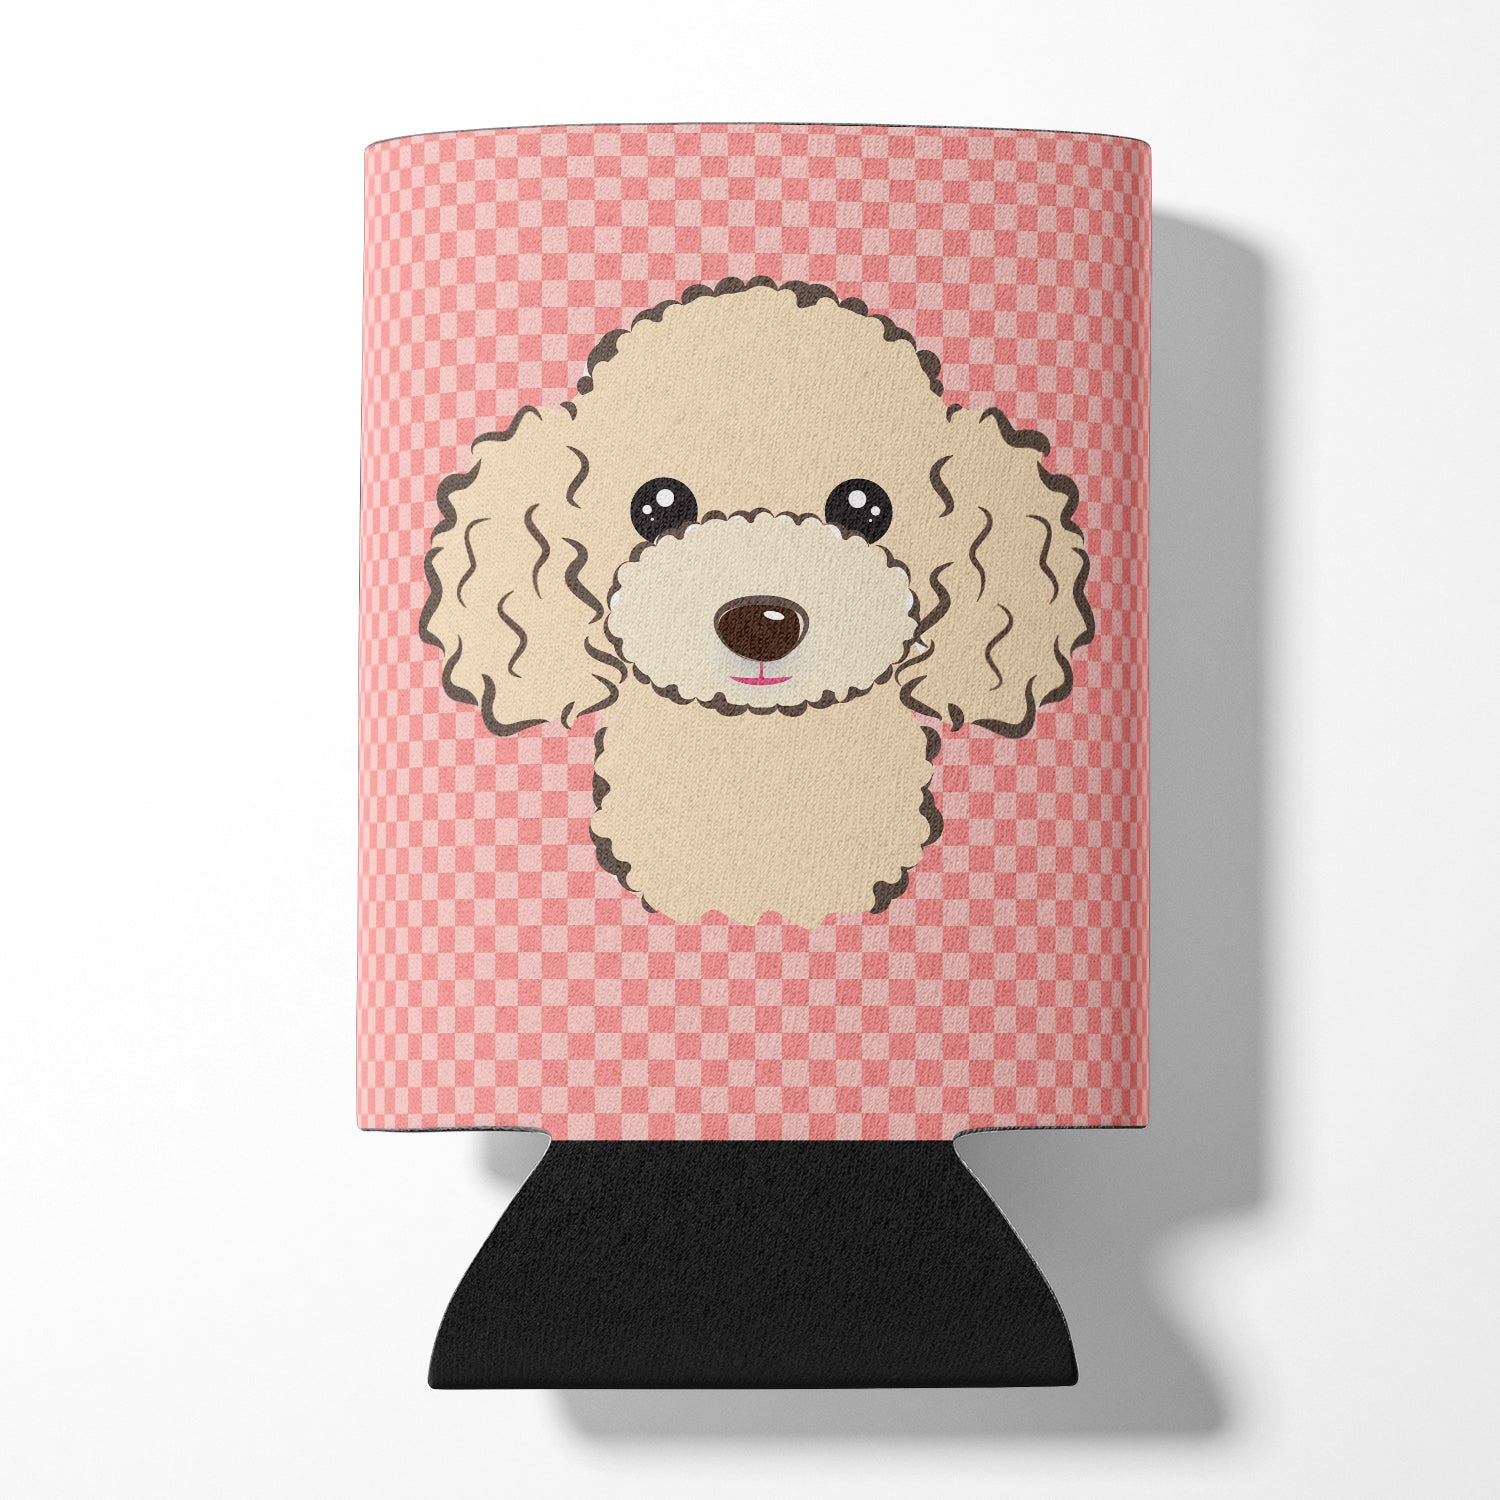 Checkerboard Pink Buff Poodle Can or Bottle Hugger BB1258CC